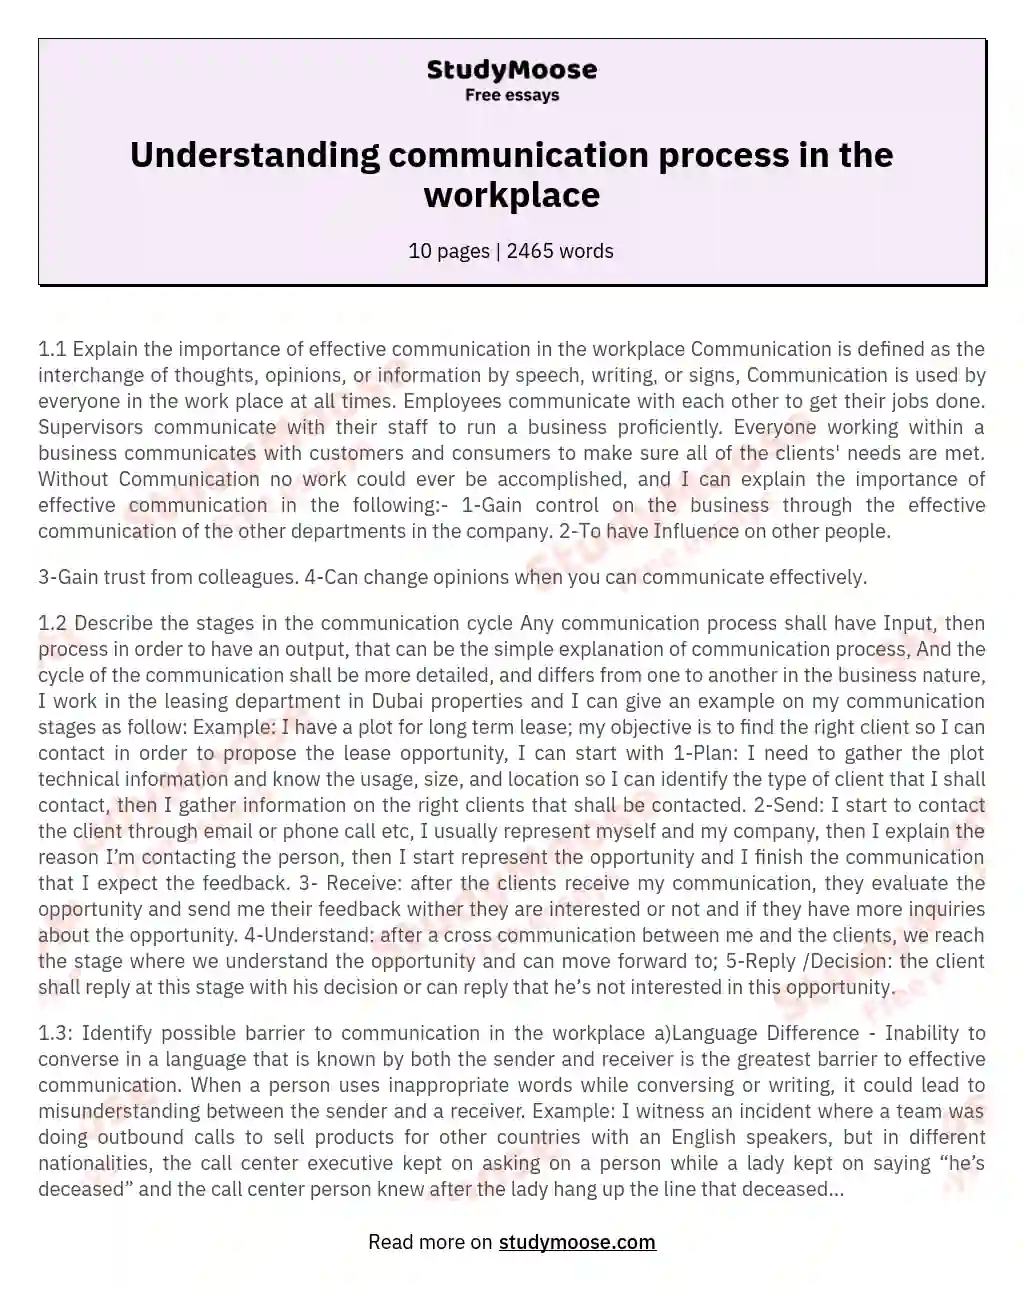 Understanding communication process in the workplace essay